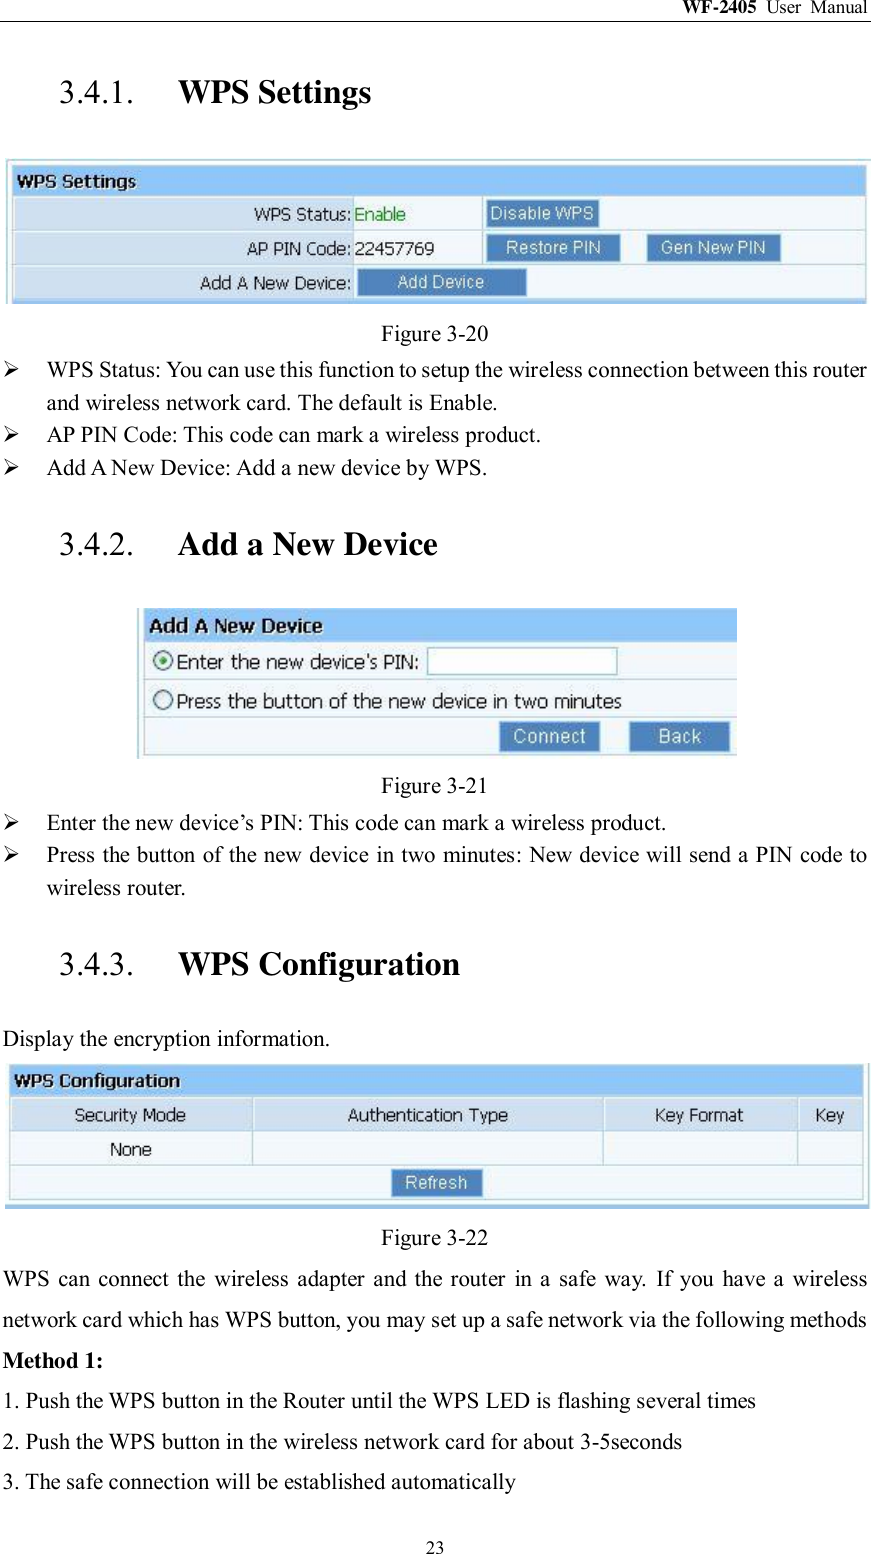 WF-2405  User  Manual  23 3.4.1. WPS Settings  Figure 3-20  WPS Status: You can use this function to setup the wireless connection between this router and wireless network card. The default is Enable.  AP PIN Code: This code can mark a wireless product.  Add A New Device: Add a new device by WPS. 3.4.2. Add a New Device  Figure 3-21  Enter the new device‟s PIN: This code can mark a wireless product.  Press the button of the new  device in two minutes: New device will send a PIN code to wireless router. 3.4.3. WPS Configuration Display the encryption information.  Figure 3-22 WPS  can connect the  wireless  adapter and  the  router  in  a  safe  way.  If  you  have a  wireless network card which has WPS button, you may set up a safe network via the following methods Method 1: 1. Push the WPS button in the Router until the WPS LED is flashing several times 2. Push the WPS button in the wireless network card for about 3-5seconds 3. The safe connection will be established automatically 